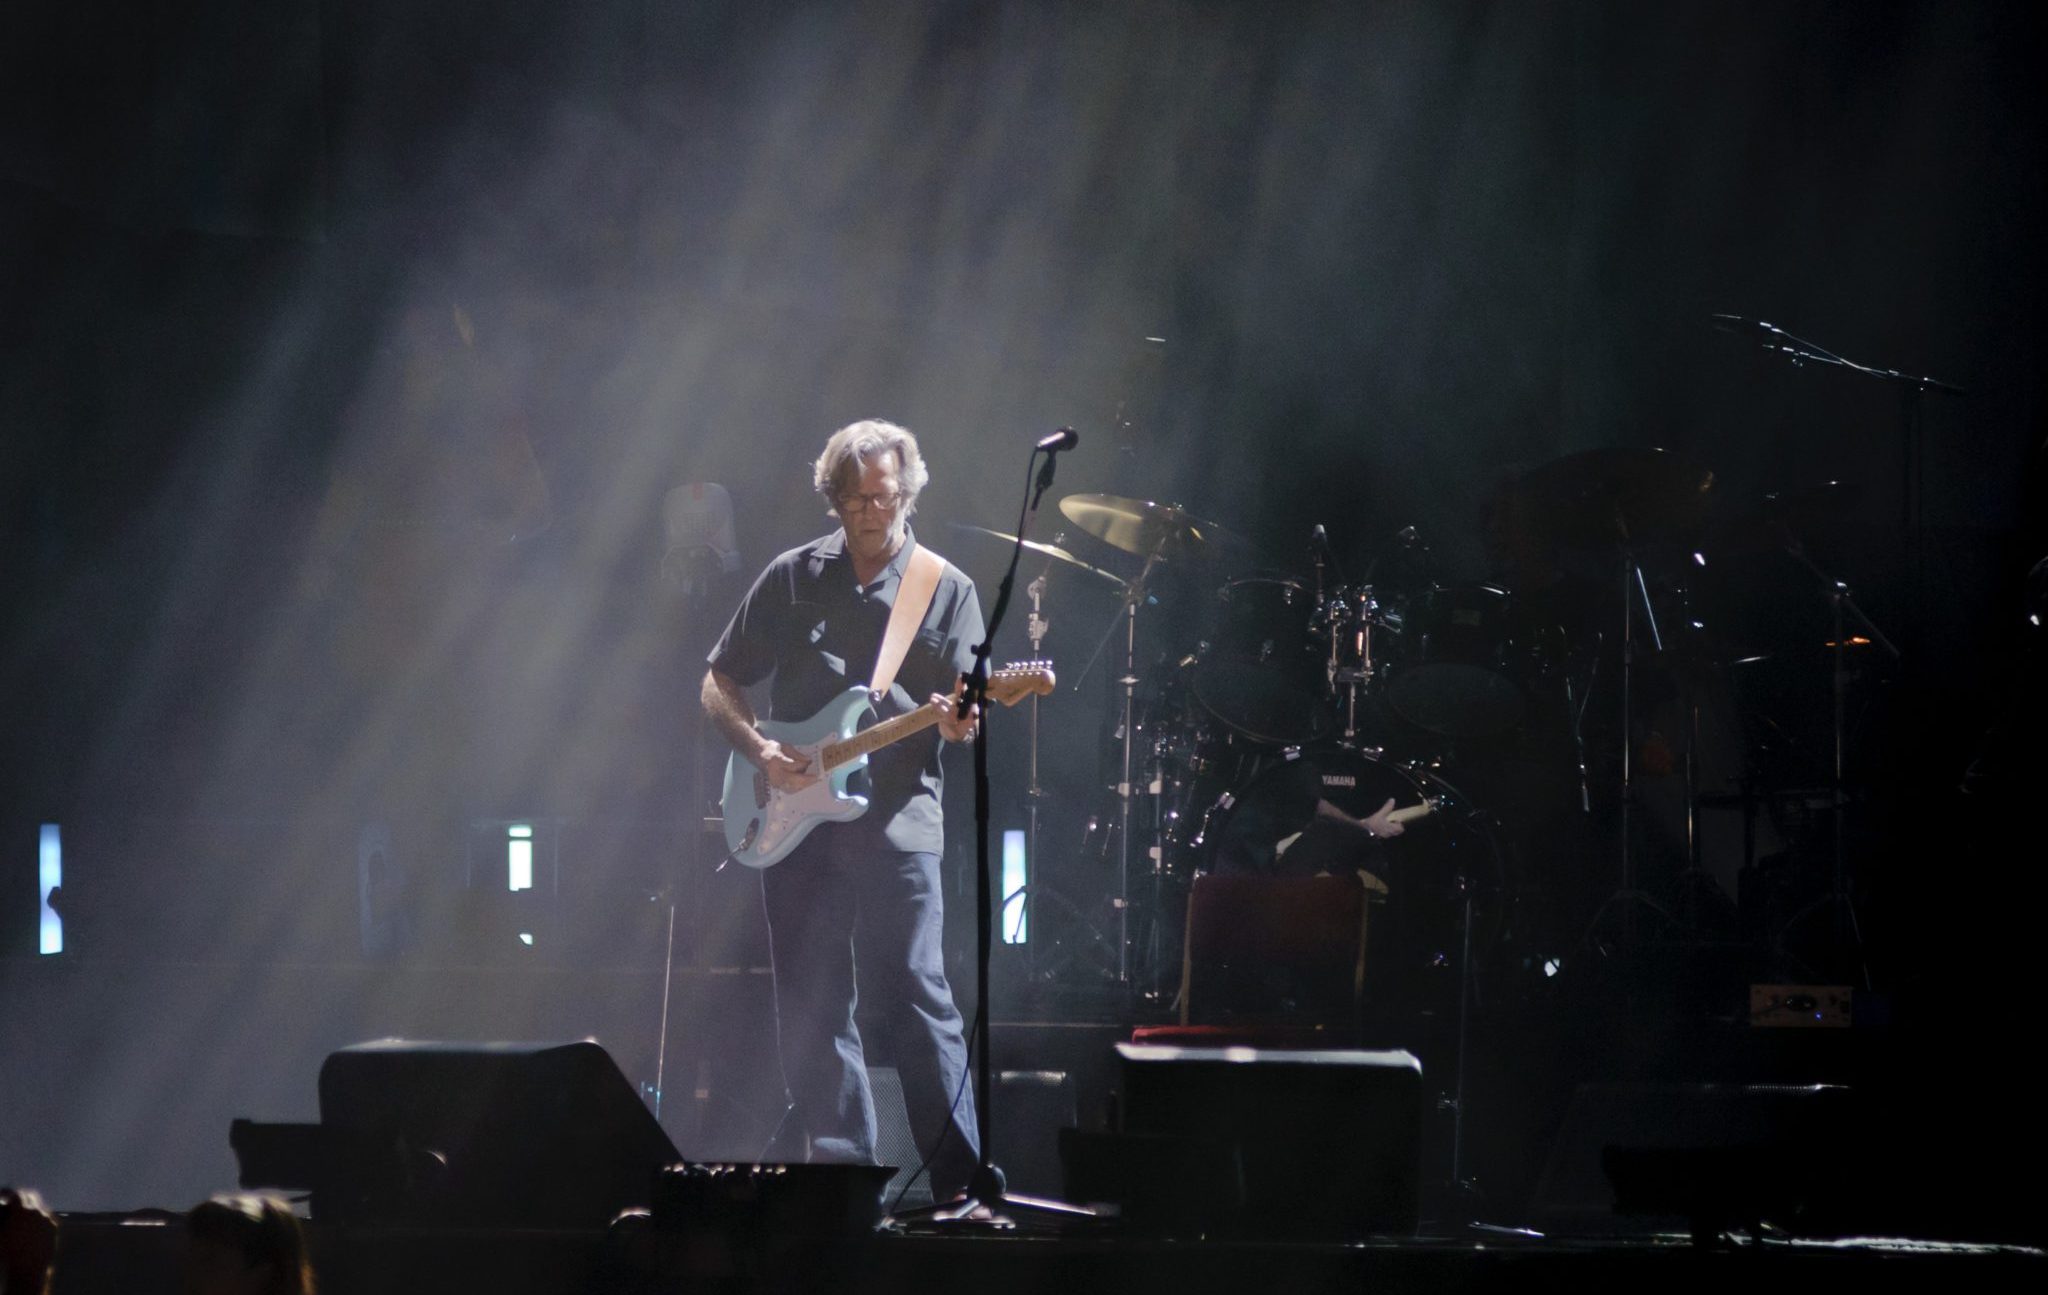 Sacramento,-,March,3:,Eric,Clapton,Performs,On,Stage,At